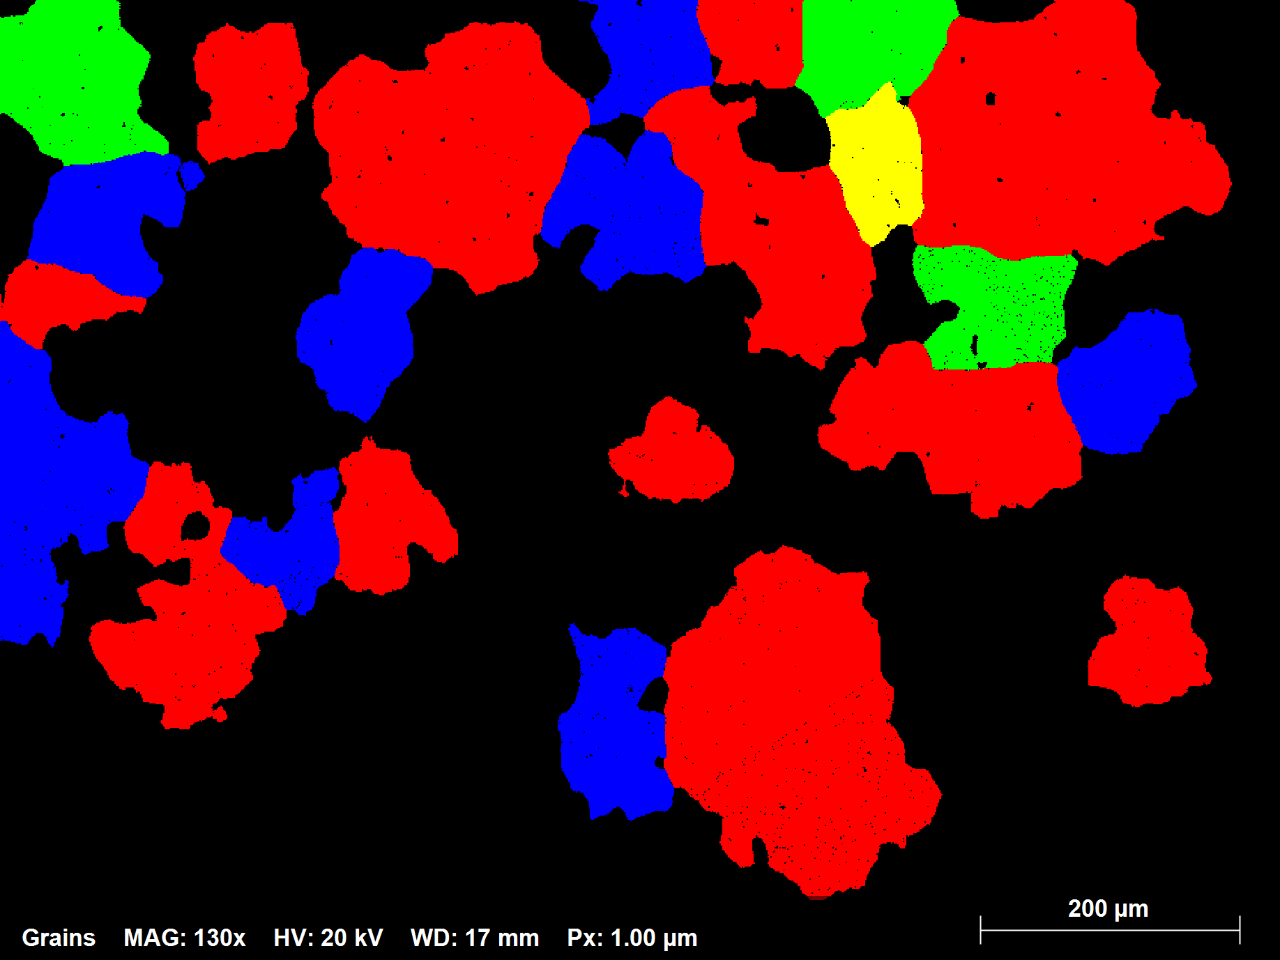 Fig. 1.3: Subset of the Ni-alloy EBSD map showing in random colors all grains with an equivalent diameter larger than 70microns; 1% of the total number of grains represent ~42% of the map area